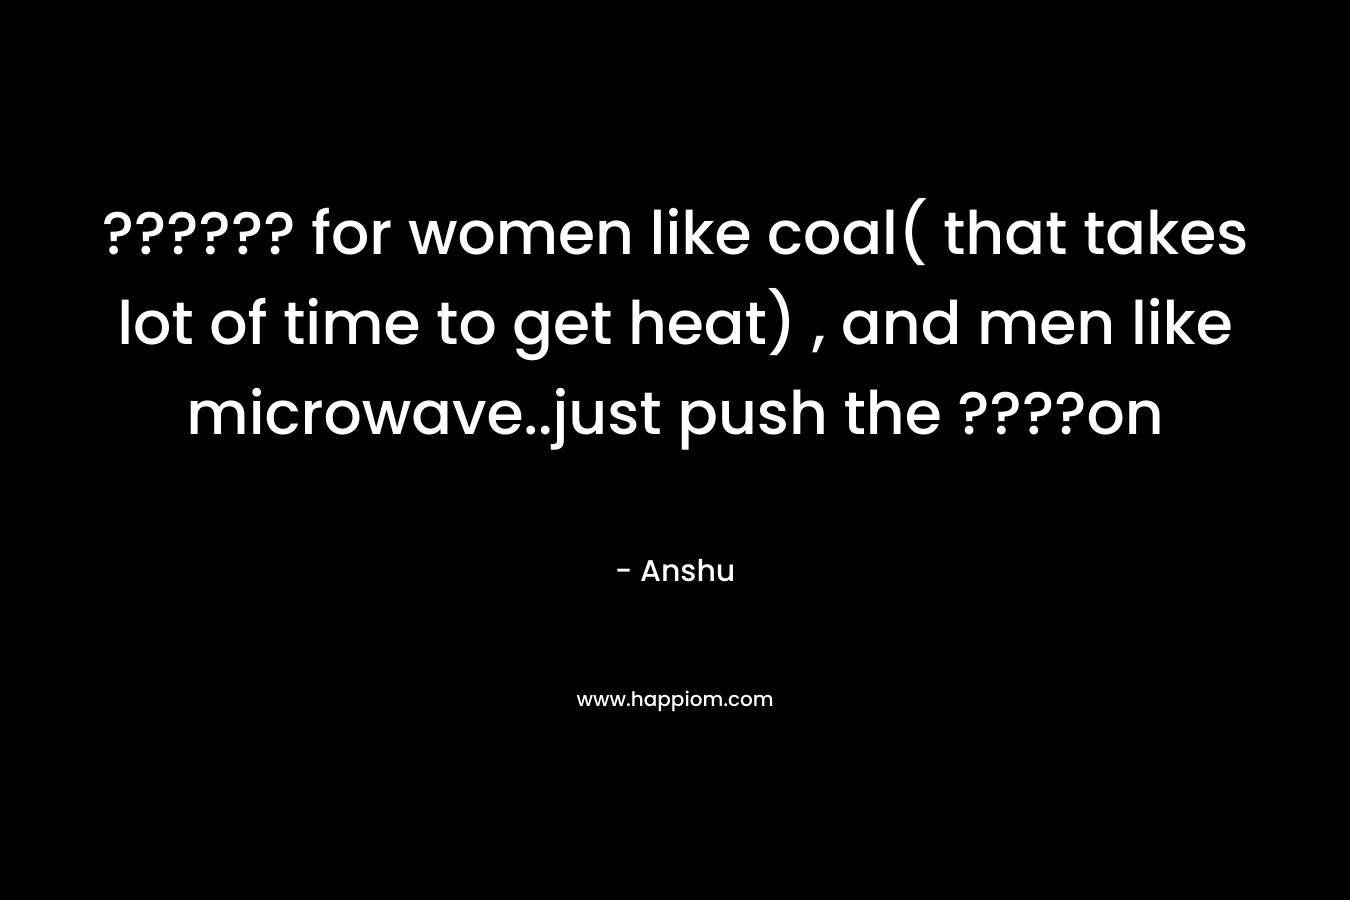 ?????? for women like coal( that takes lot of time to get heat) , and men like microwave..just push the ????on – Anshu